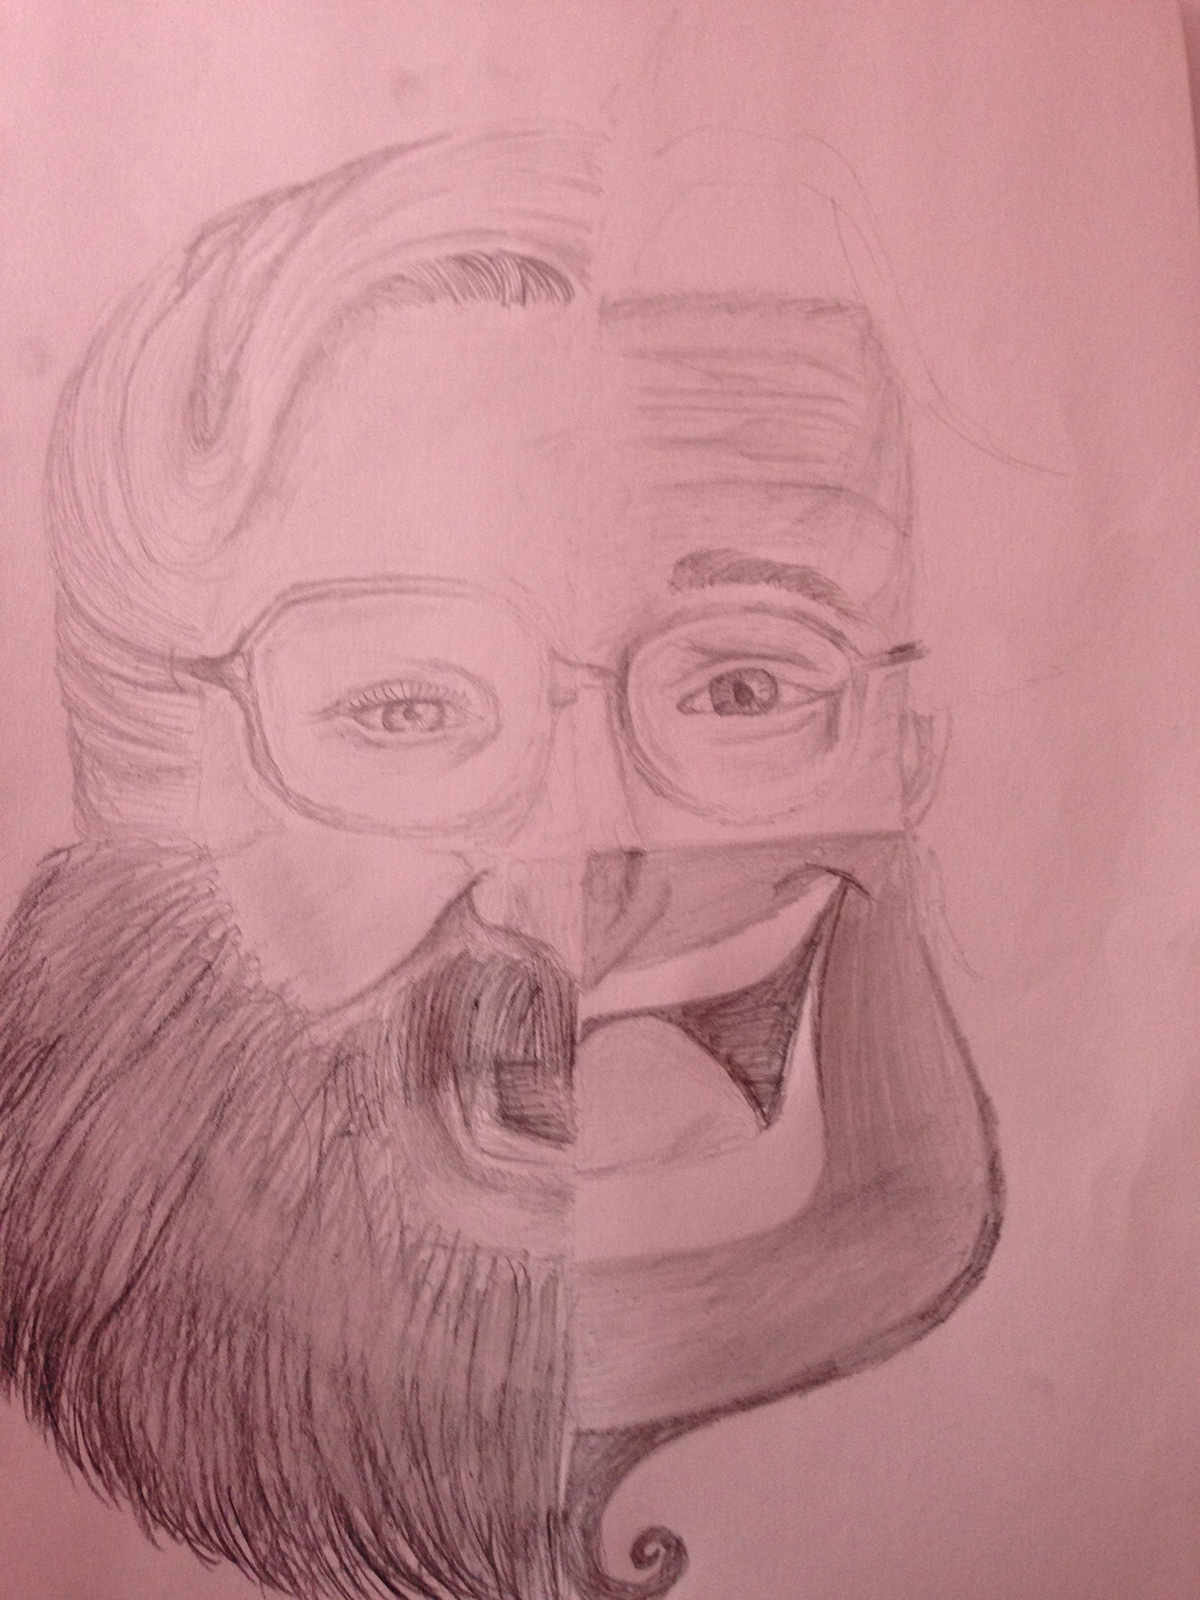 pencil sketch Transcription Robin williams mrs doubtfire tribute aladdin Good Will Hunting paper shading details eyes